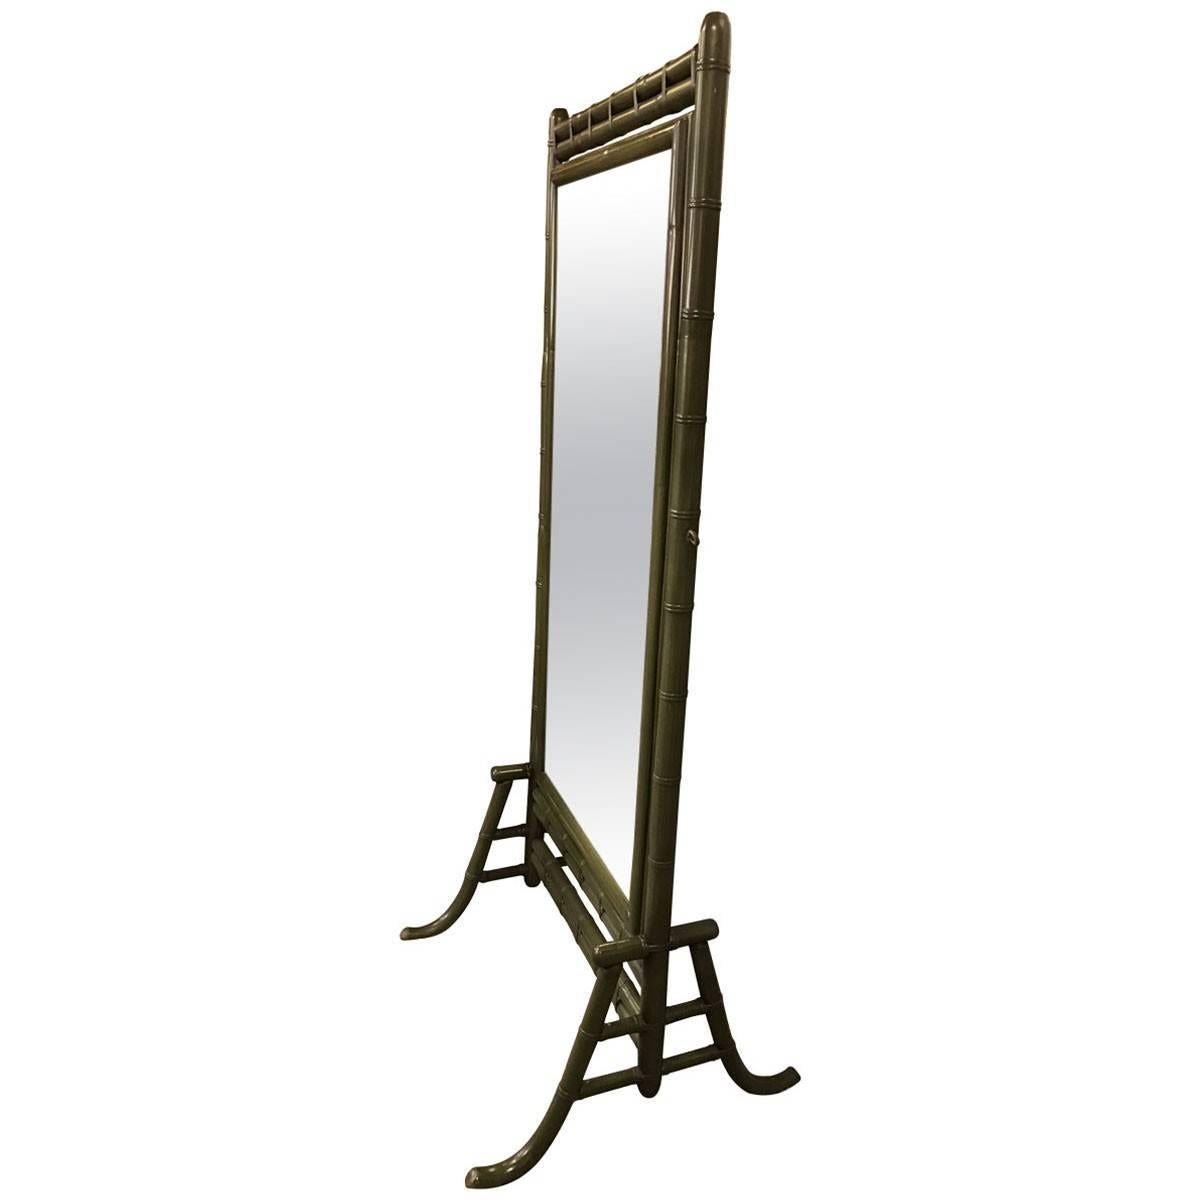 Designed in the Hollywood Regency style with its signature touches of the global inspiration, this vintage floor mirror has a dark green hardwood frame carved to resemble authentic bamboo. Made during the 1960s, this piece pivots to make getting